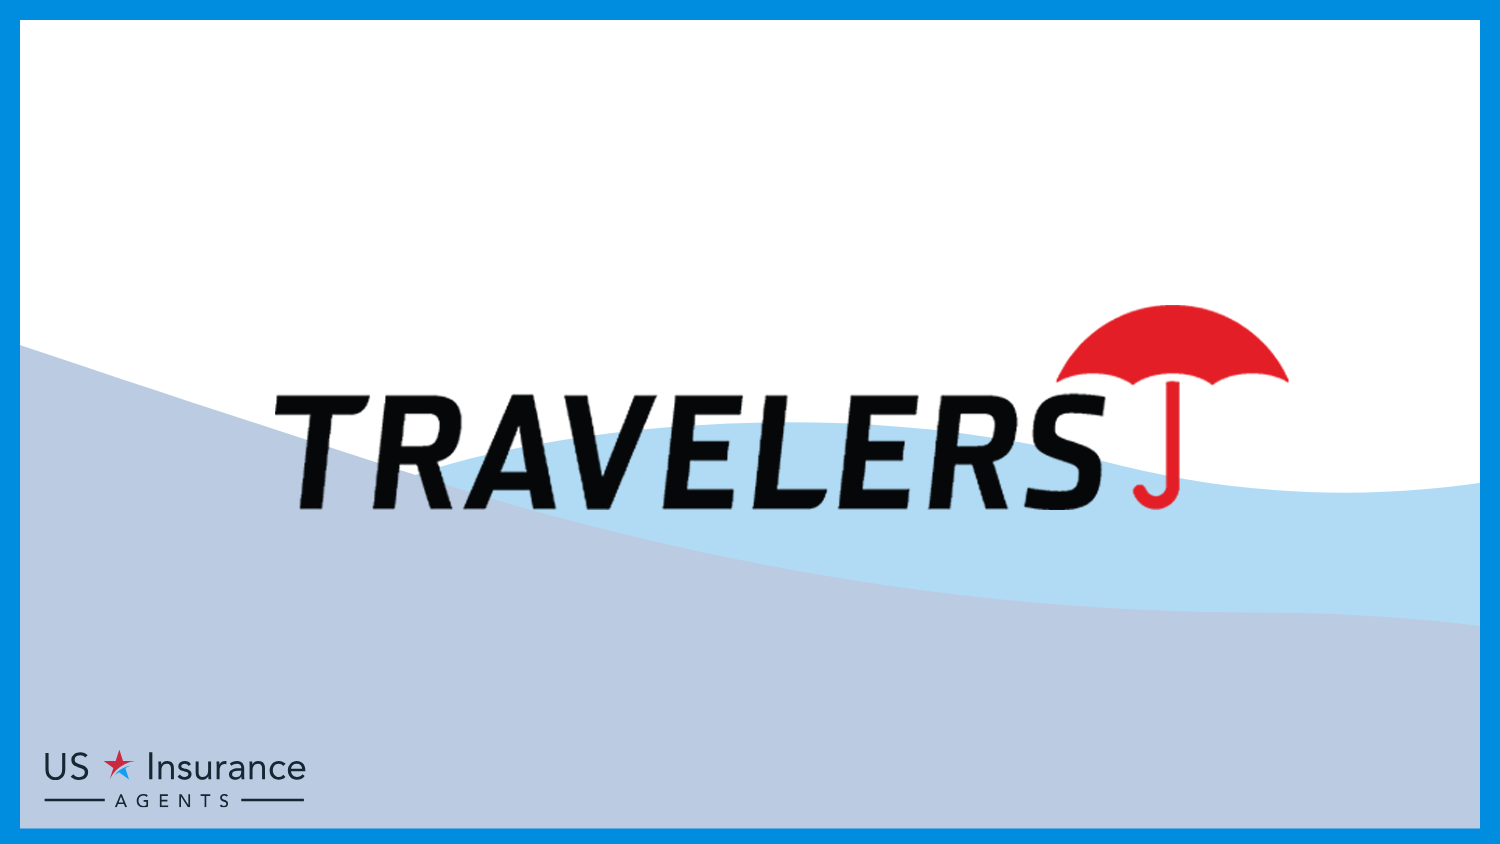 Travelers: Best Business Insurance for Car Rental Services